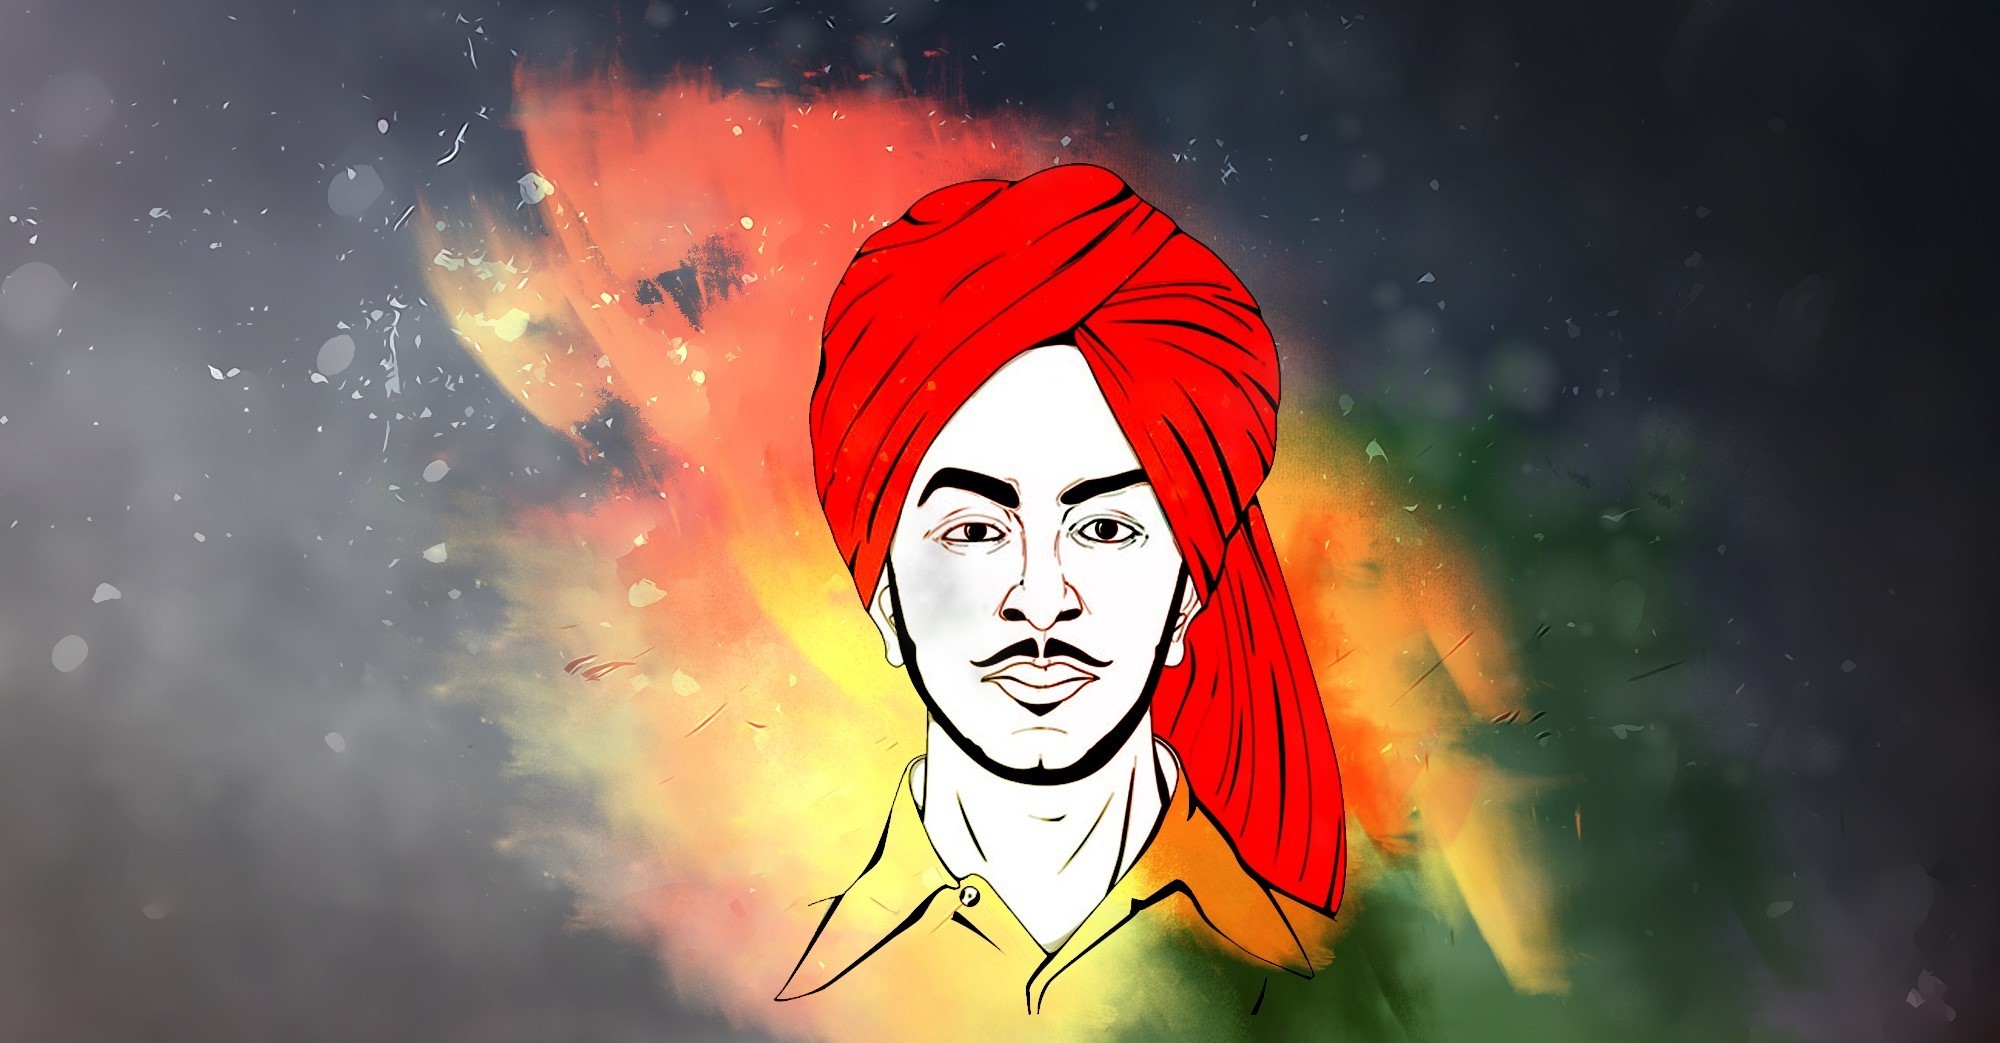 Top Bhagat Singh Desktop Wallpaper of all time Check it out now 